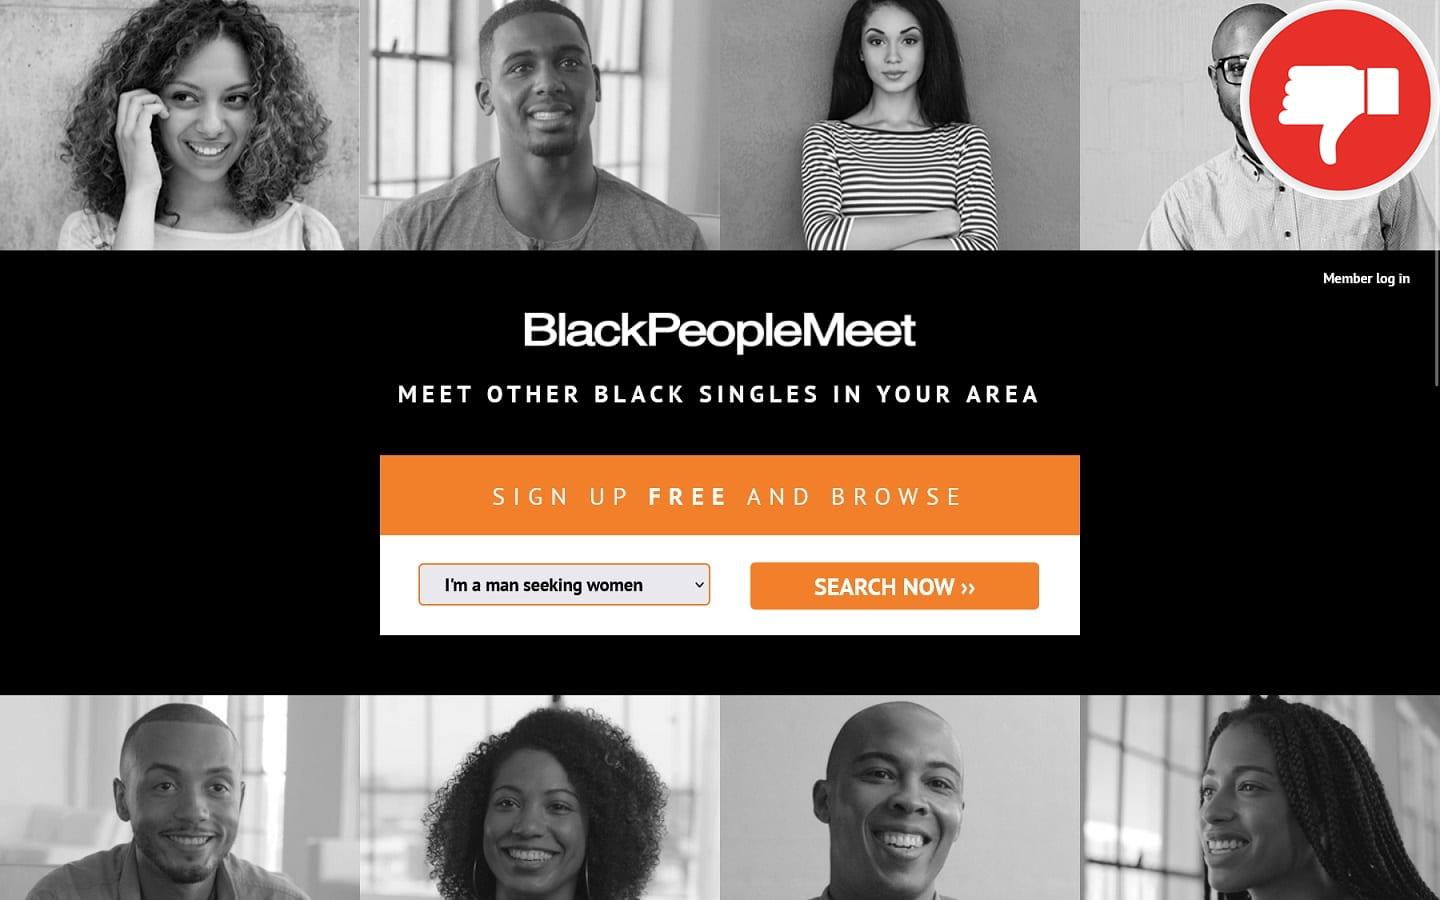 Review BlackPeopleMeet.com scam experience